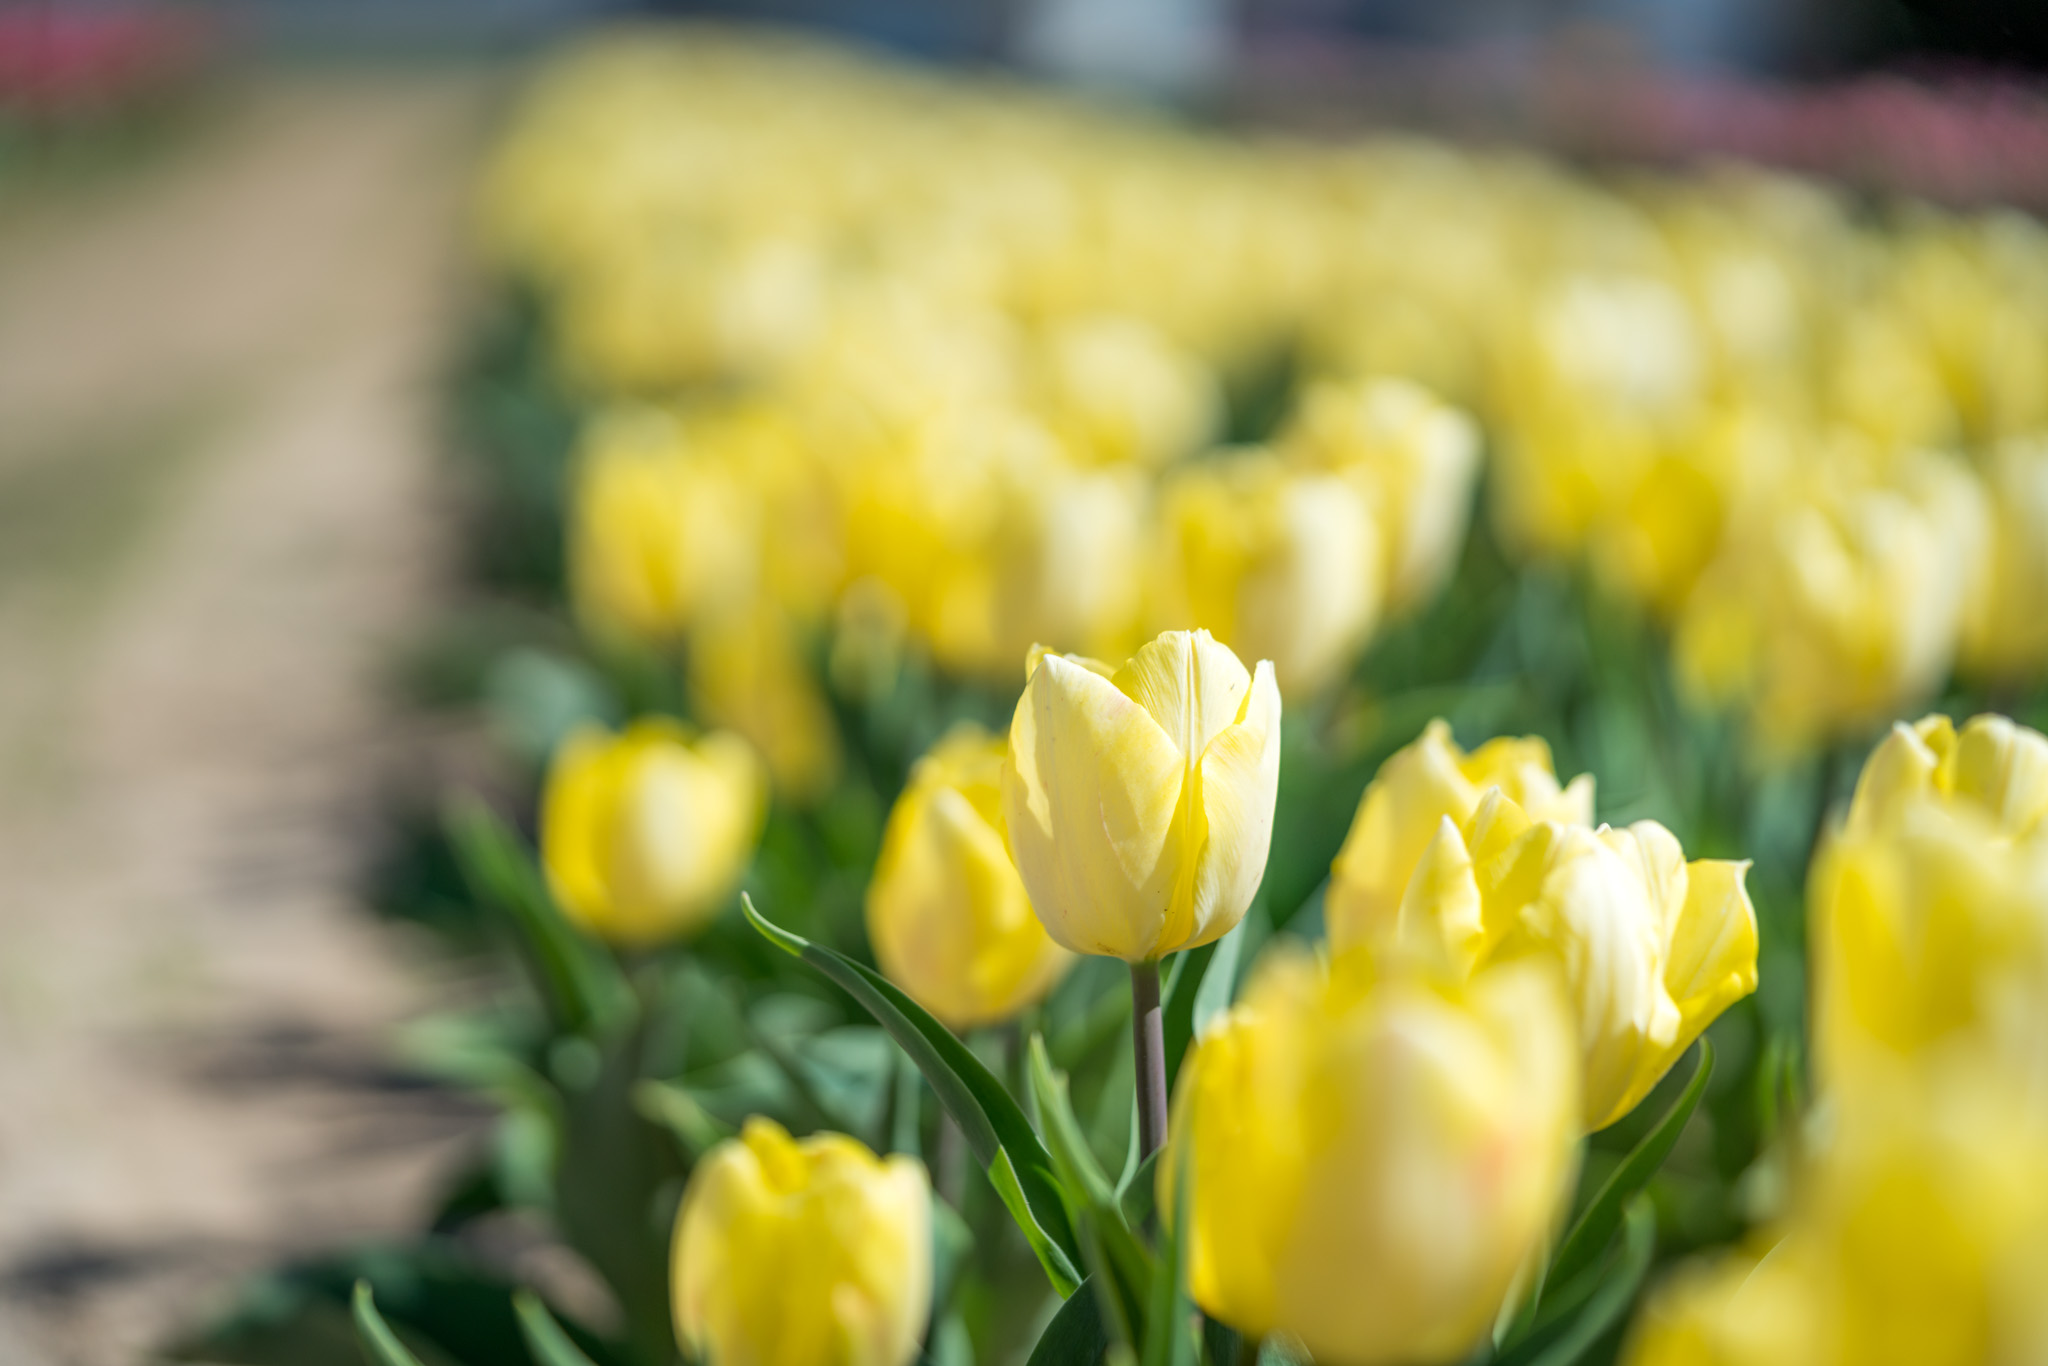 a field of yellow tulips